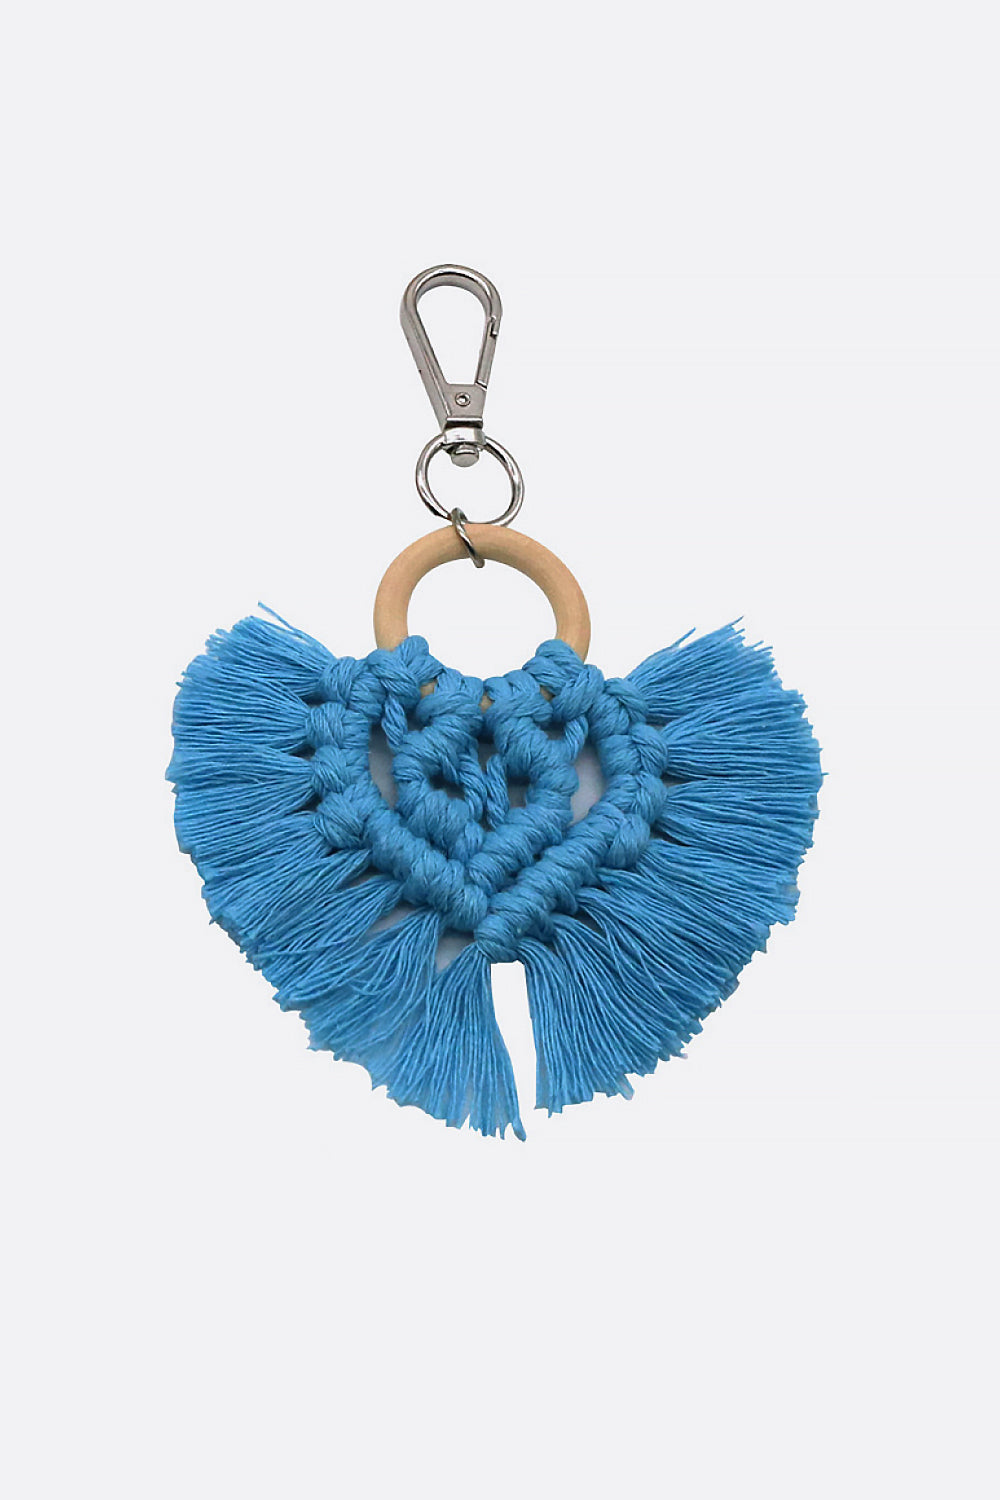 Trendsi Cupid Beauty Supplies Azure / One Size Keychains Assorted 4-Pack Heart-Shaped Macrame Fringe Keychain